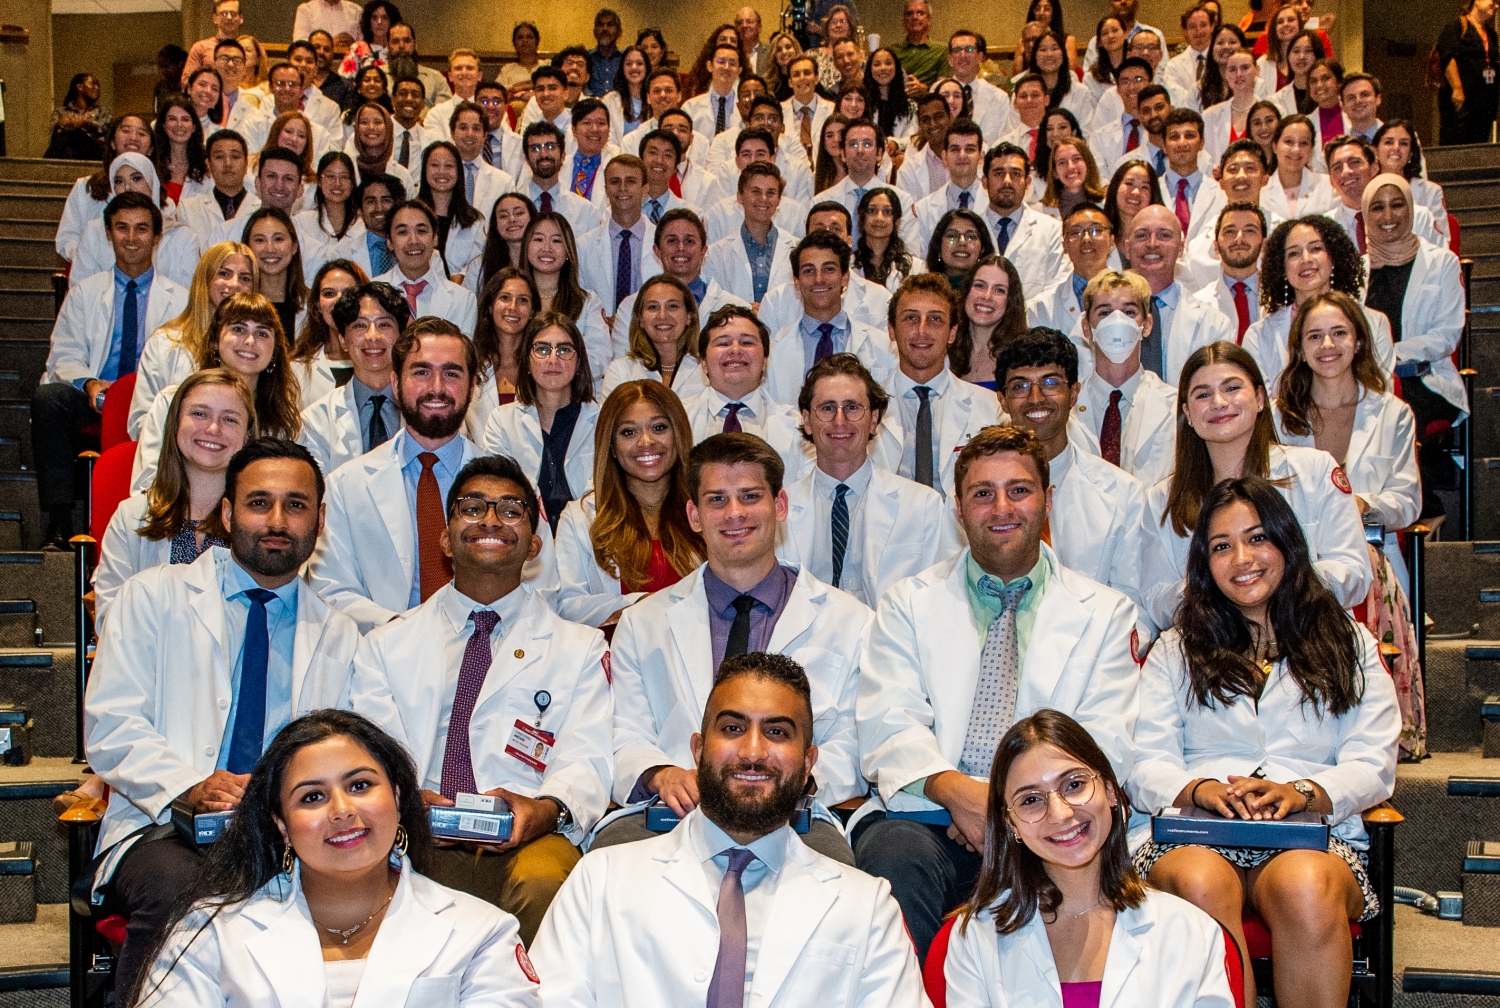 Students wearing short white coats sitting in rows of seats in an auditorium.